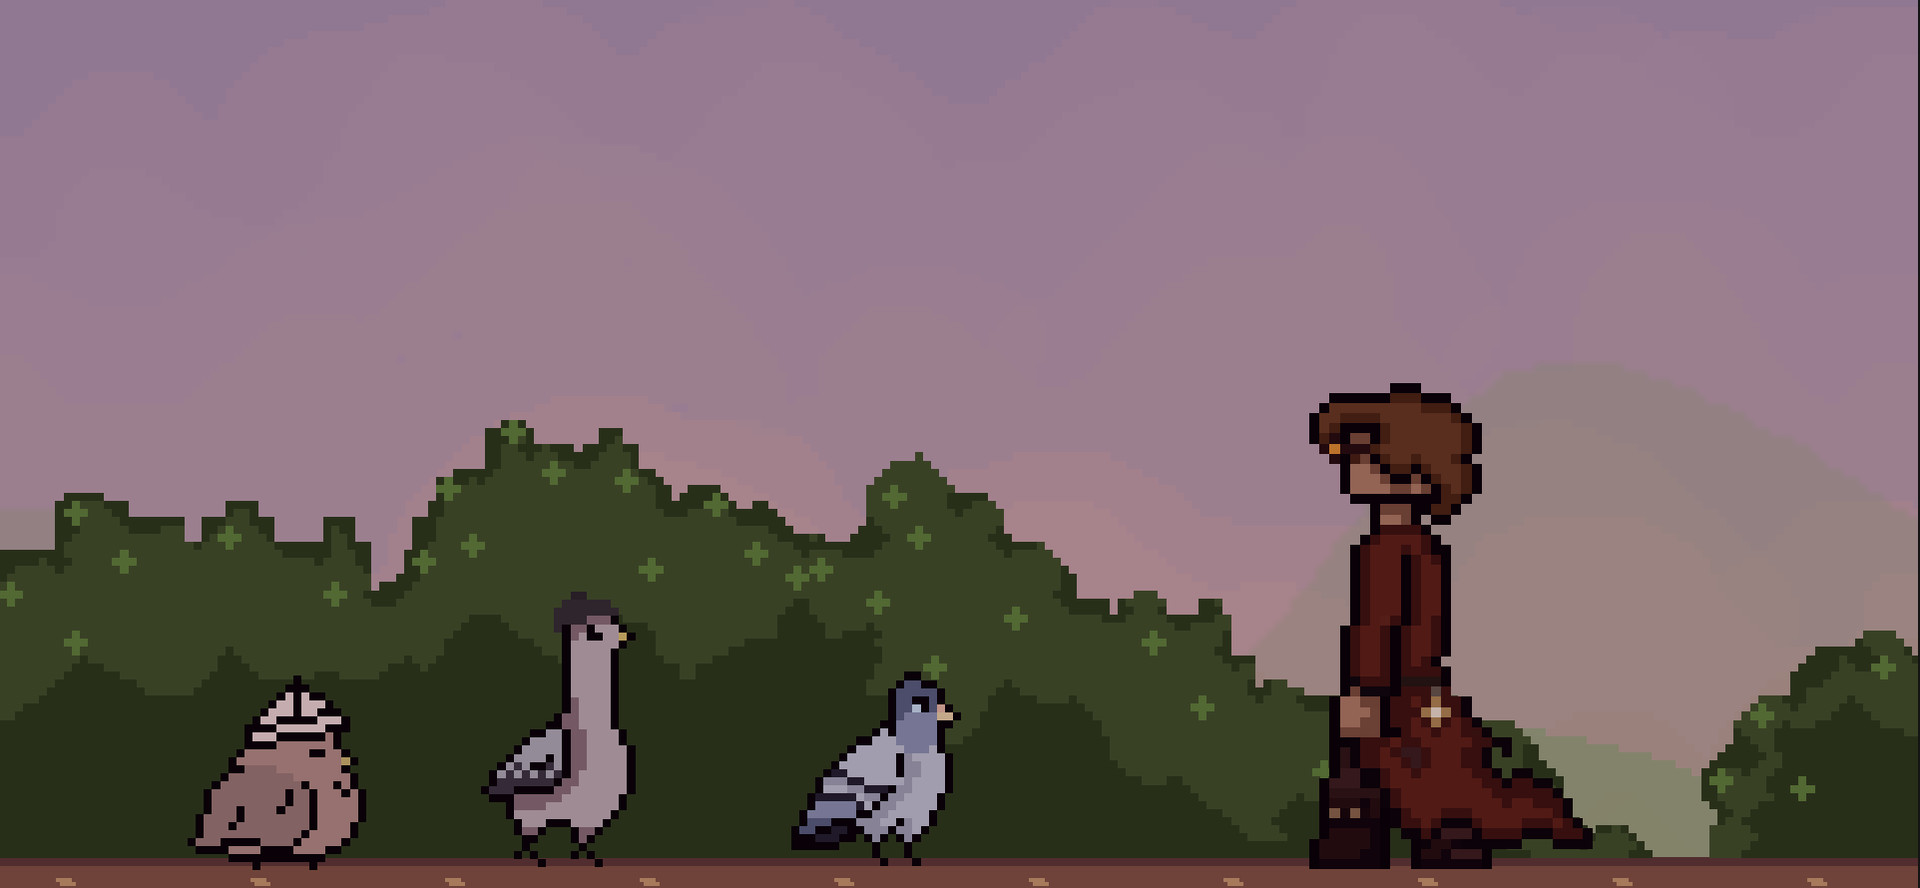 Three Pigeons in a Trench Coat